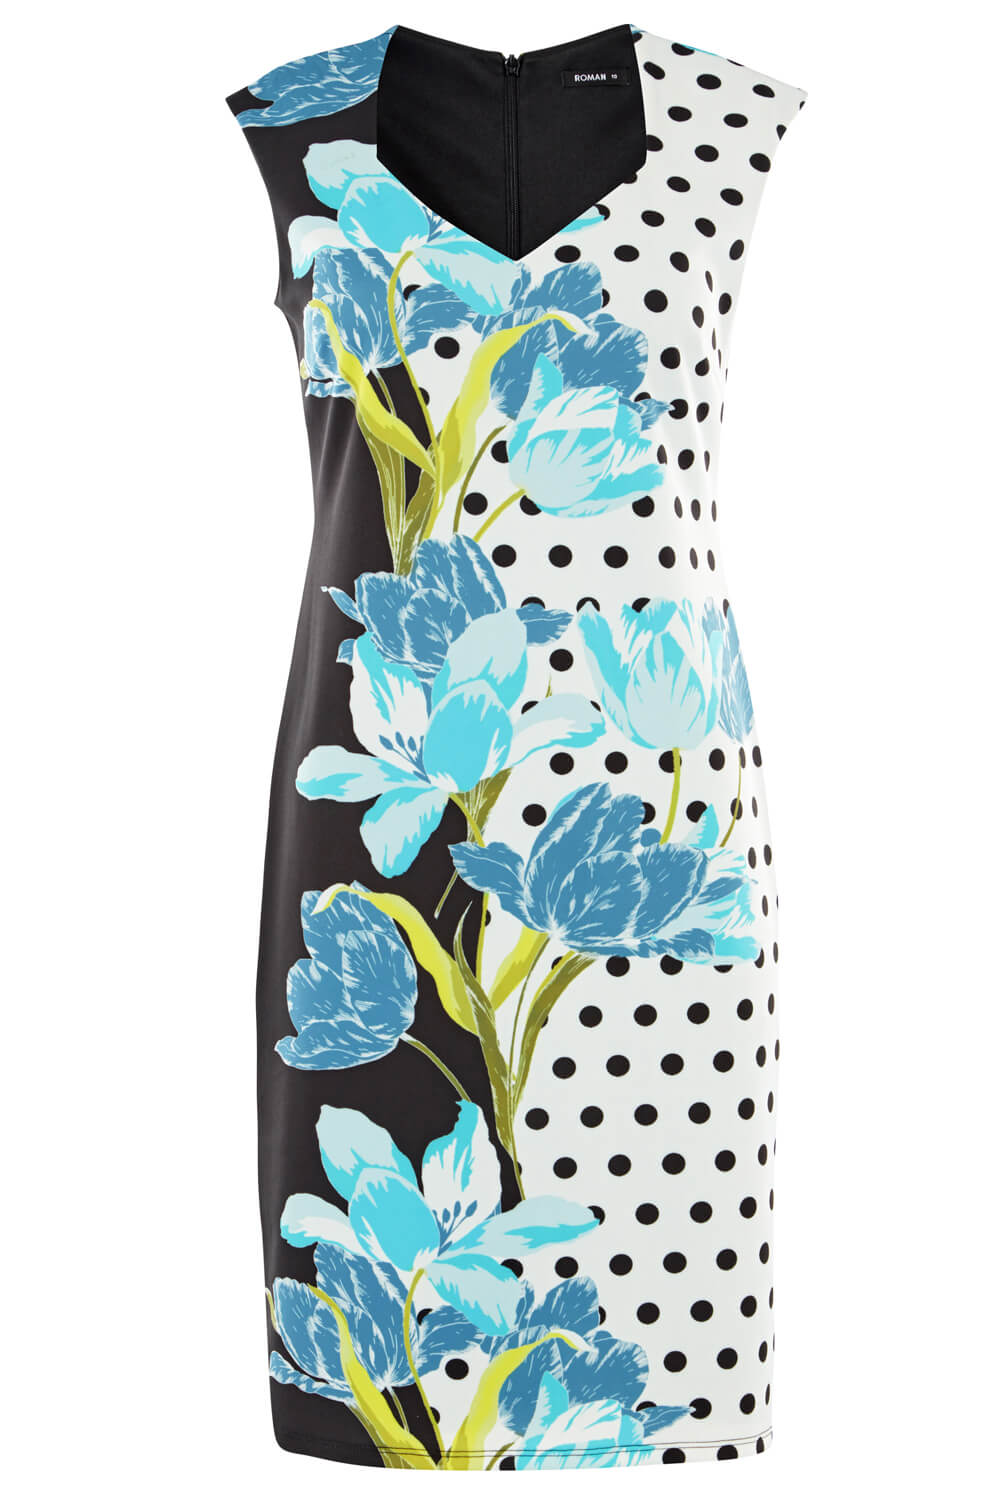 Sweetheart Spot Floral Stretch Dress in Turquoise - Roman Originals UK